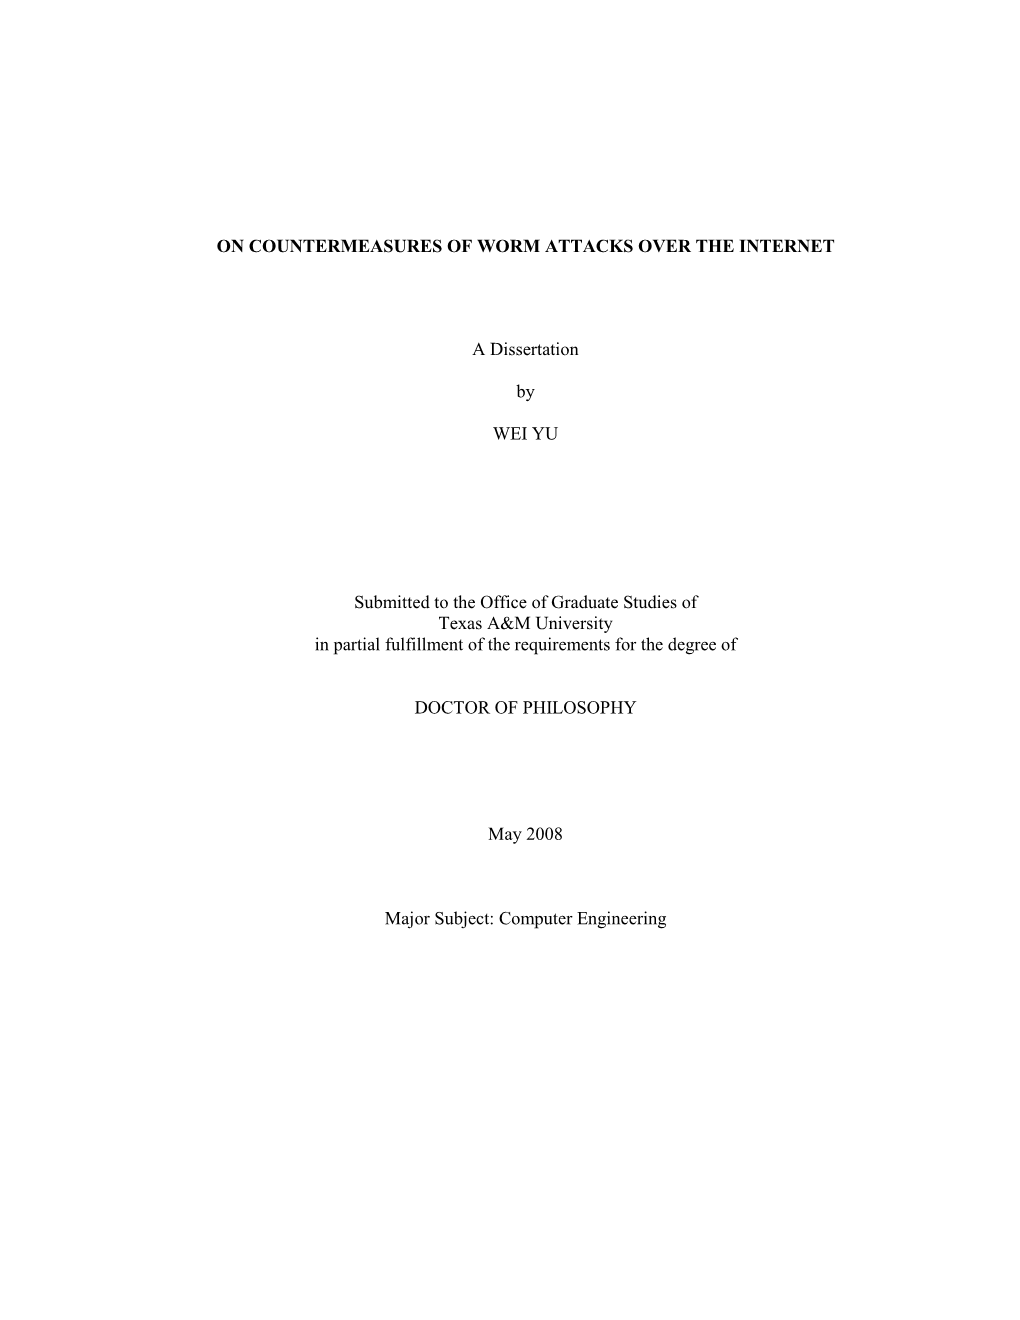 ON COUNTERMEASURES of WORM ATTACKS OVER the INTERNET a Dissertation by WEI YU Submitted to the Office of Graduate Studies Of